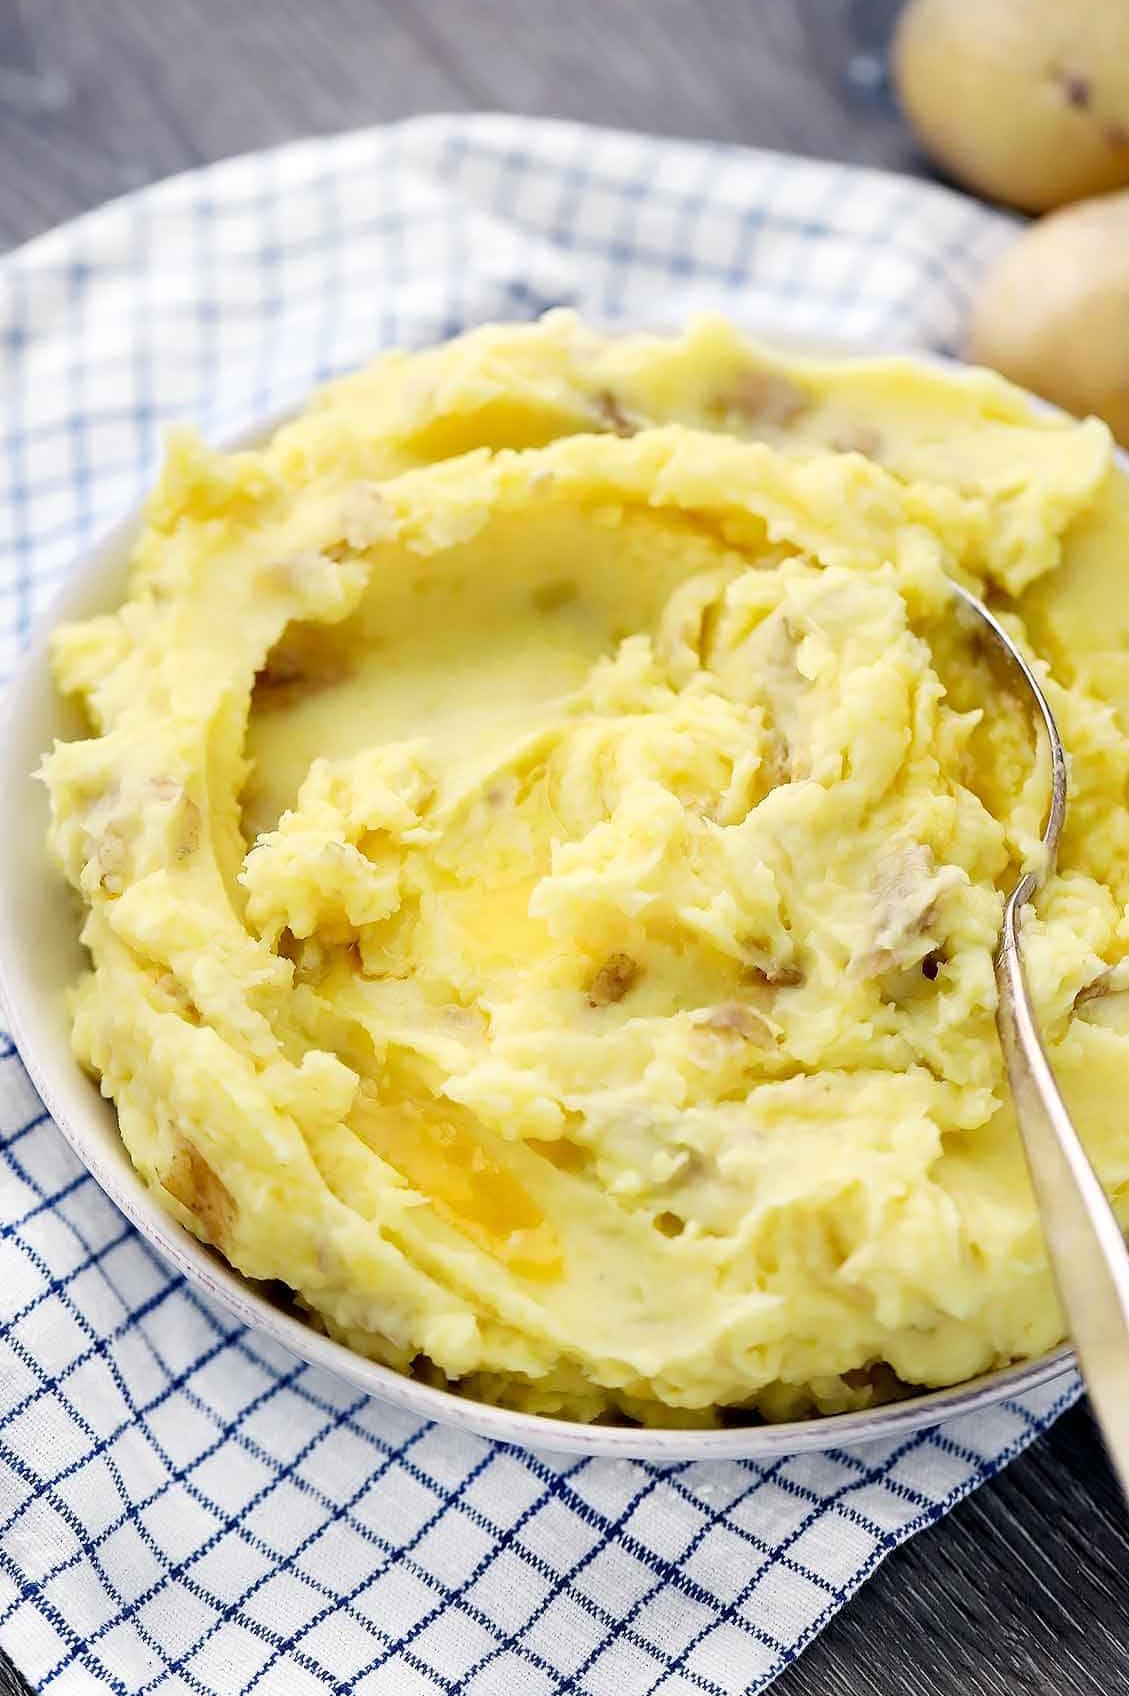 A bowl of homemade mashed potatoes with melted butter and a spoon.